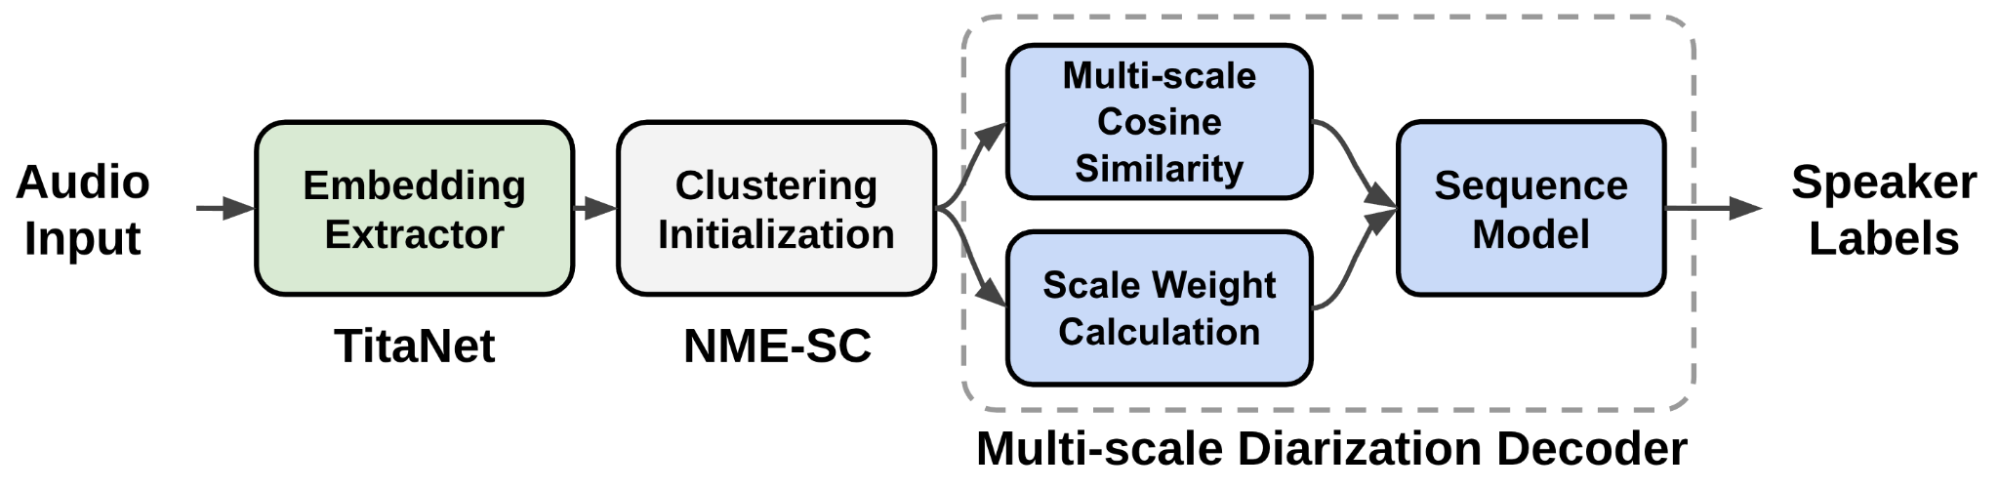 Data-flow starts from Audio input, then goes to Embedding Extractor, Clustering Initialization. Then, the signal is split into boxes named Multi-scale Cosine Similarity and Scale Weight Calculation, then merged again at a box named Sequence Model. Lastly, the last box outputs Speaker Labels.